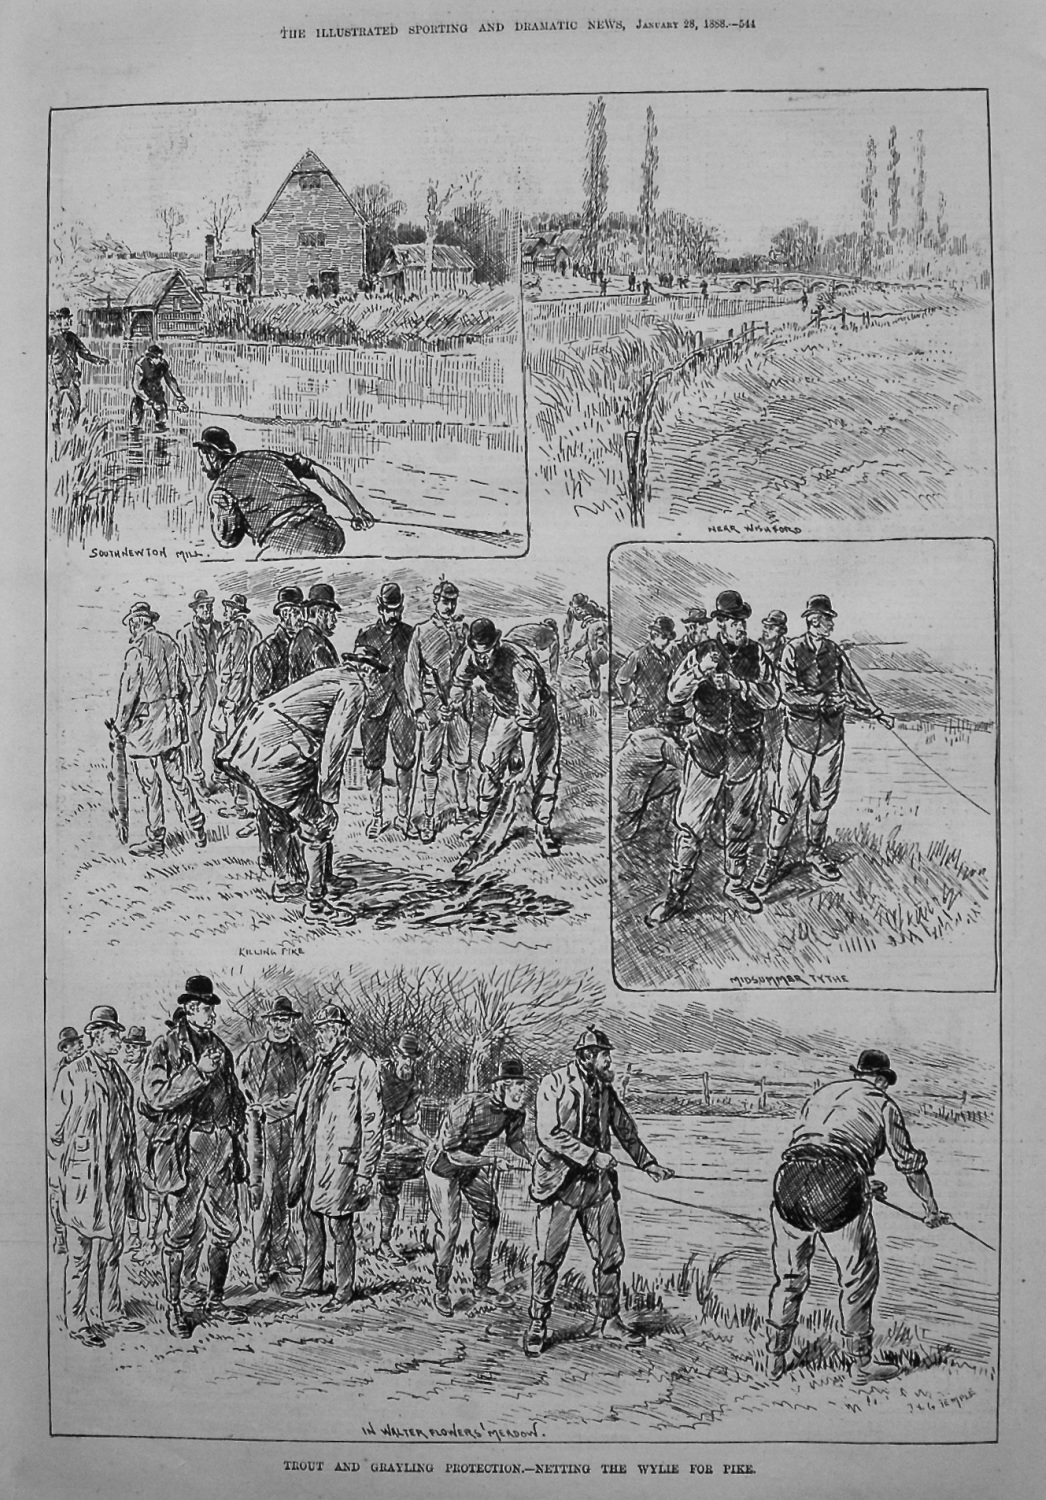 Trout and Grayling Protection.- Netting the Wylie for Pike. 1888